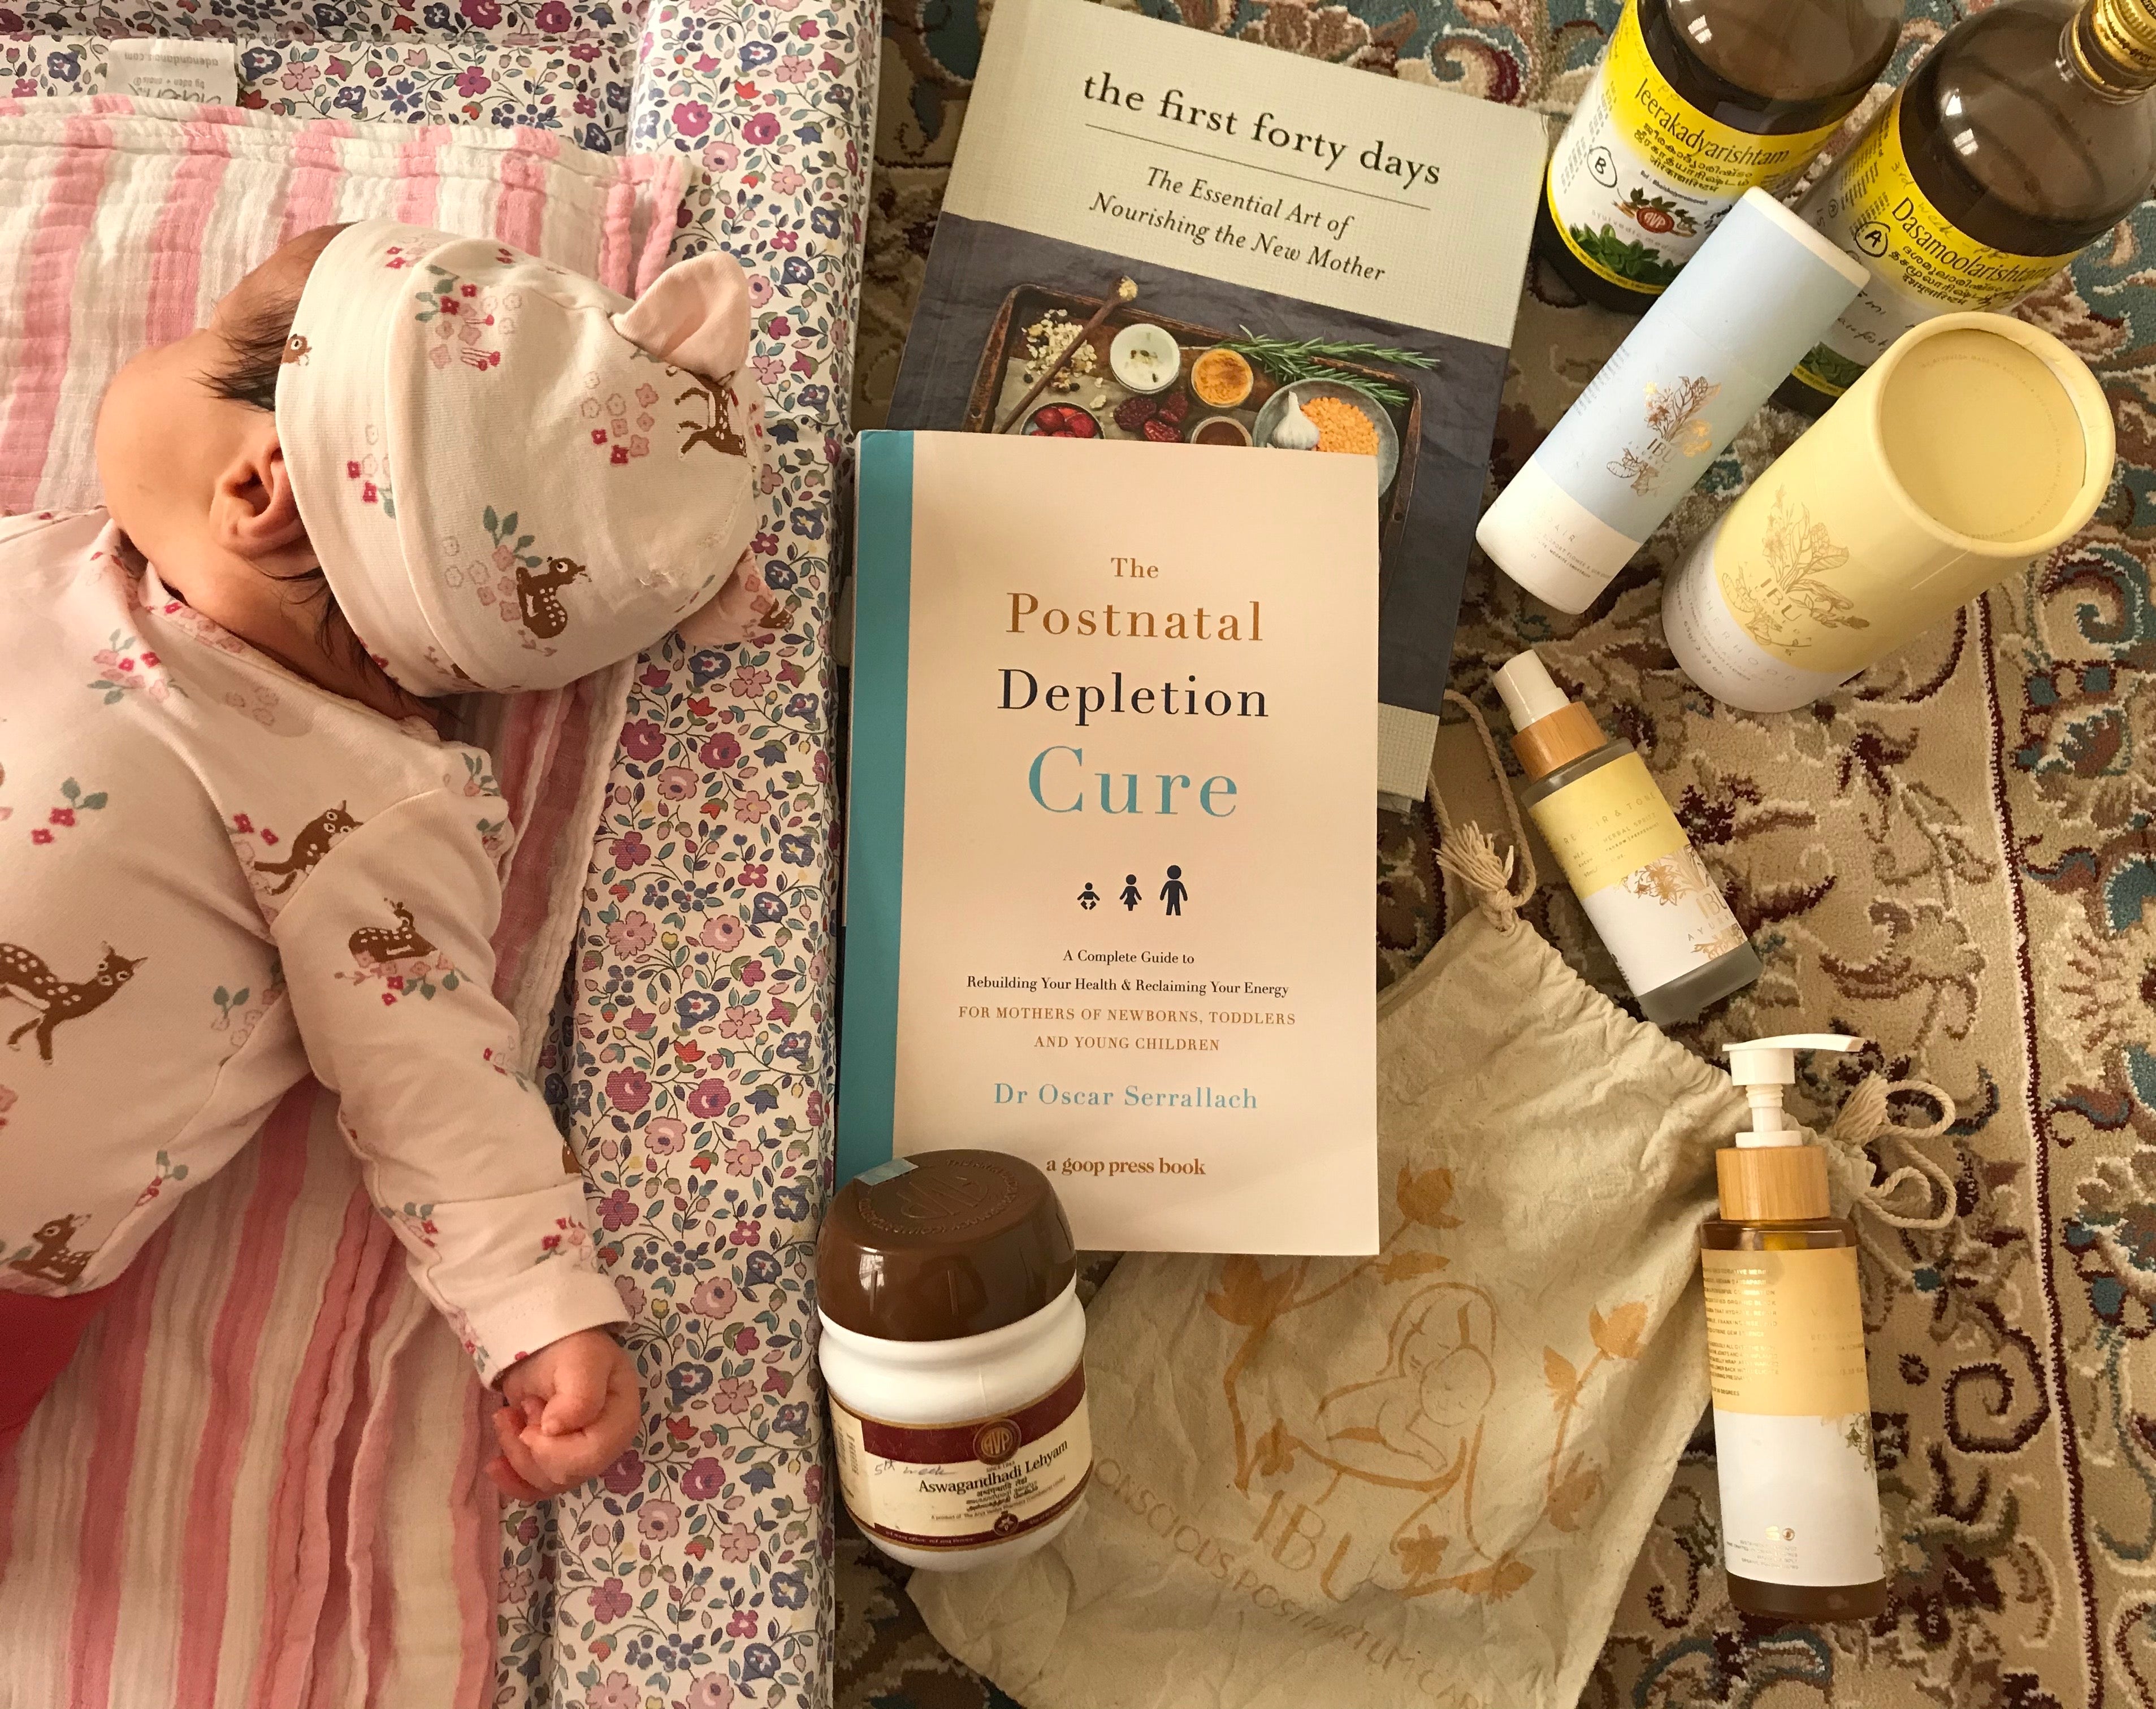 How to Pack Your Post-Birth Bag  - Naturopathic & Ayurvedic Tips!